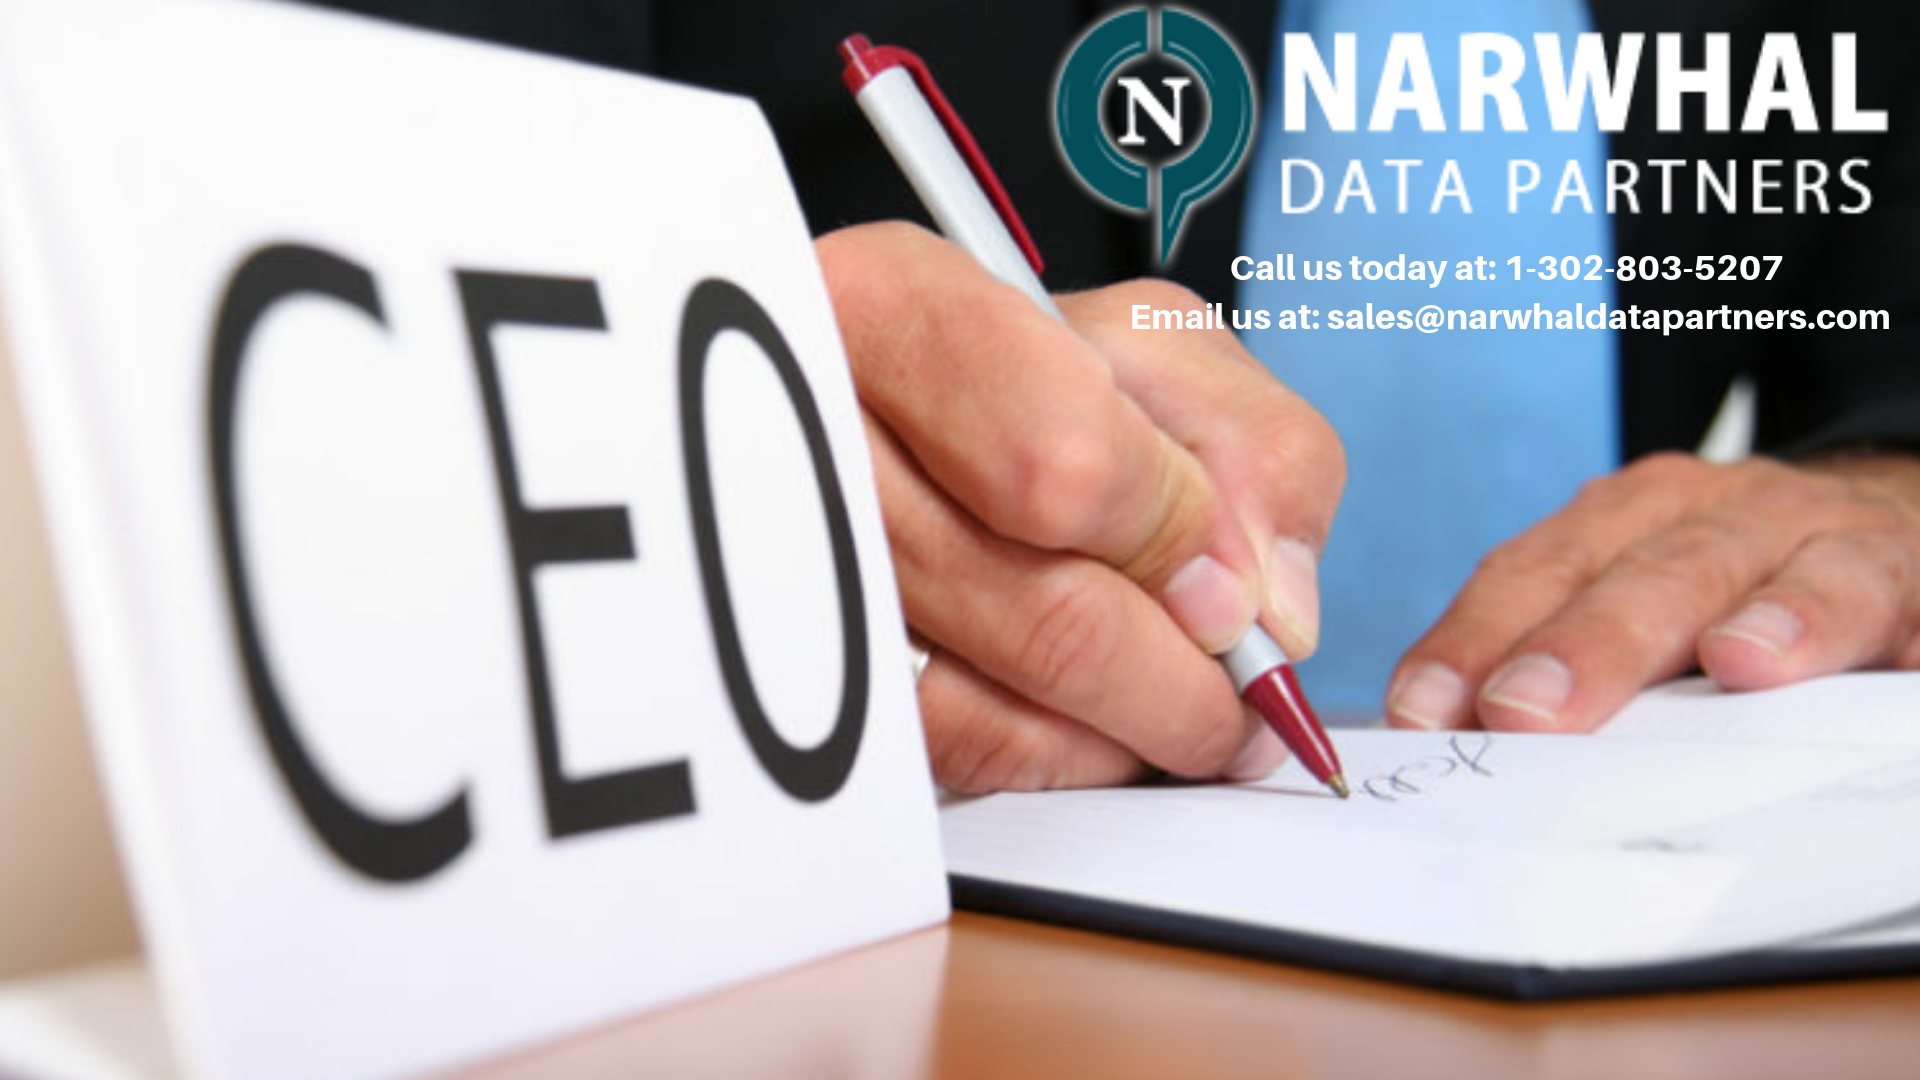 http://narwhaldatapartners.com/chief-executive-officer-email-list.html